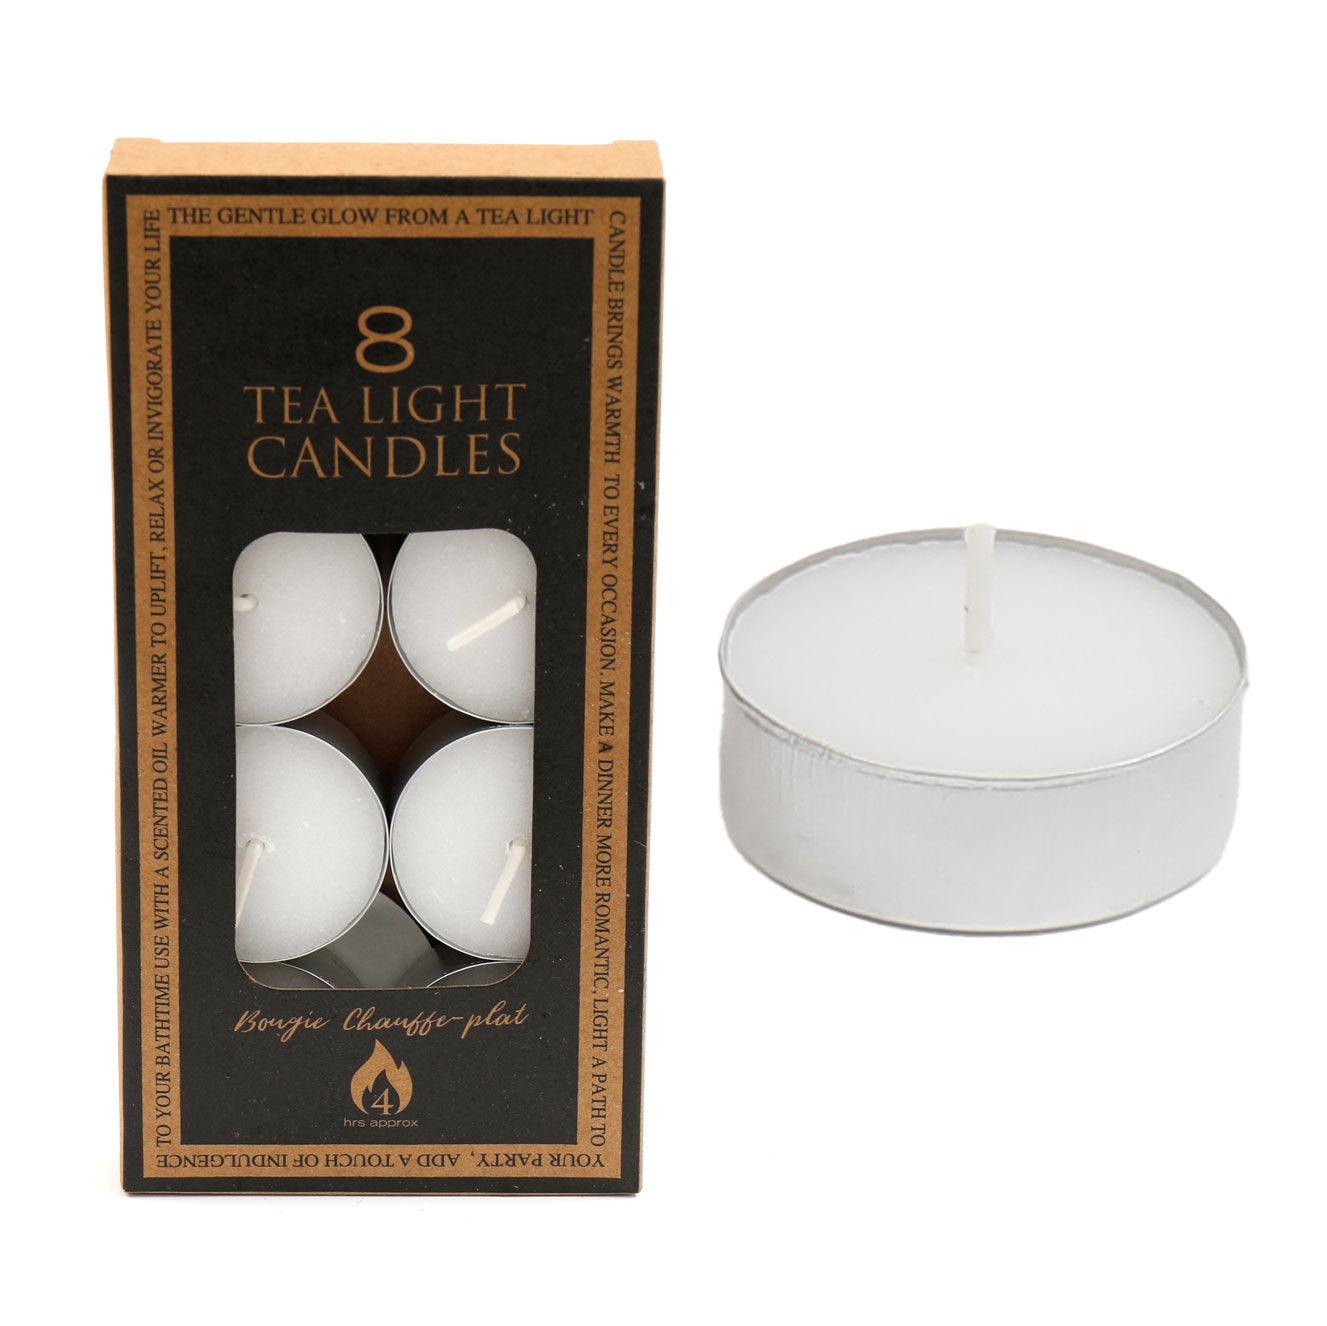 View Pack of 8 4Hour Unscented Tealight Candles information